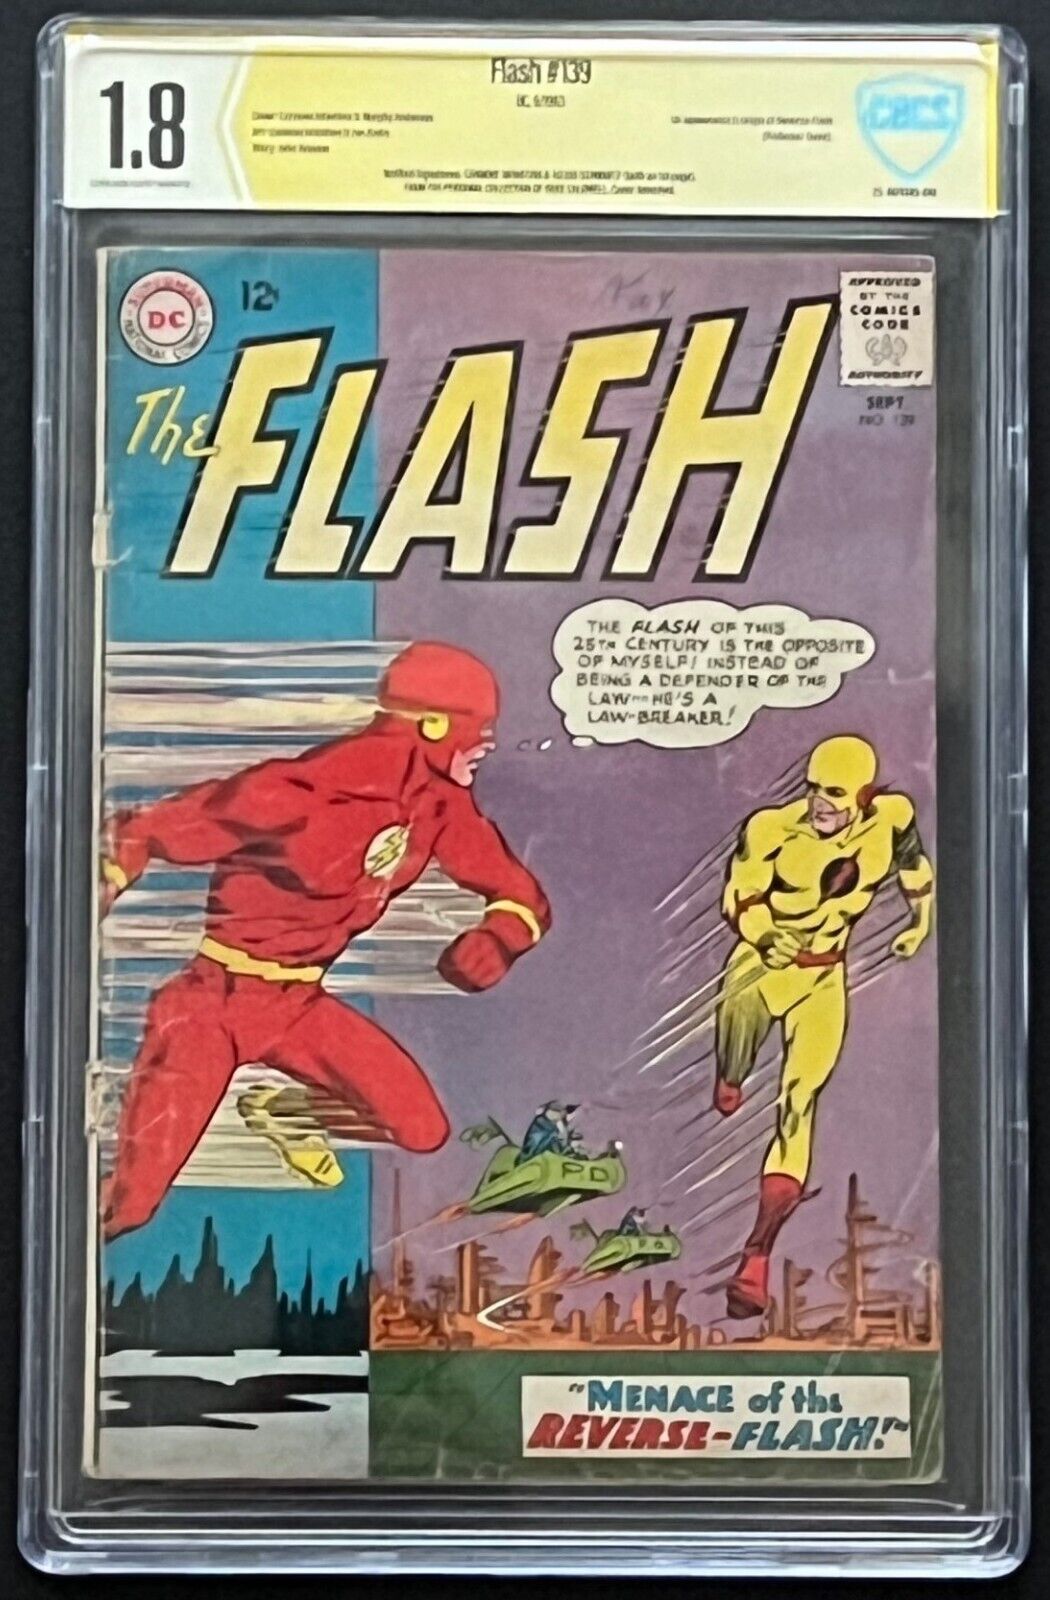 Flash #139 CBCS 1.8 signed Infantino Schwartz Collection of Duke Caldwell